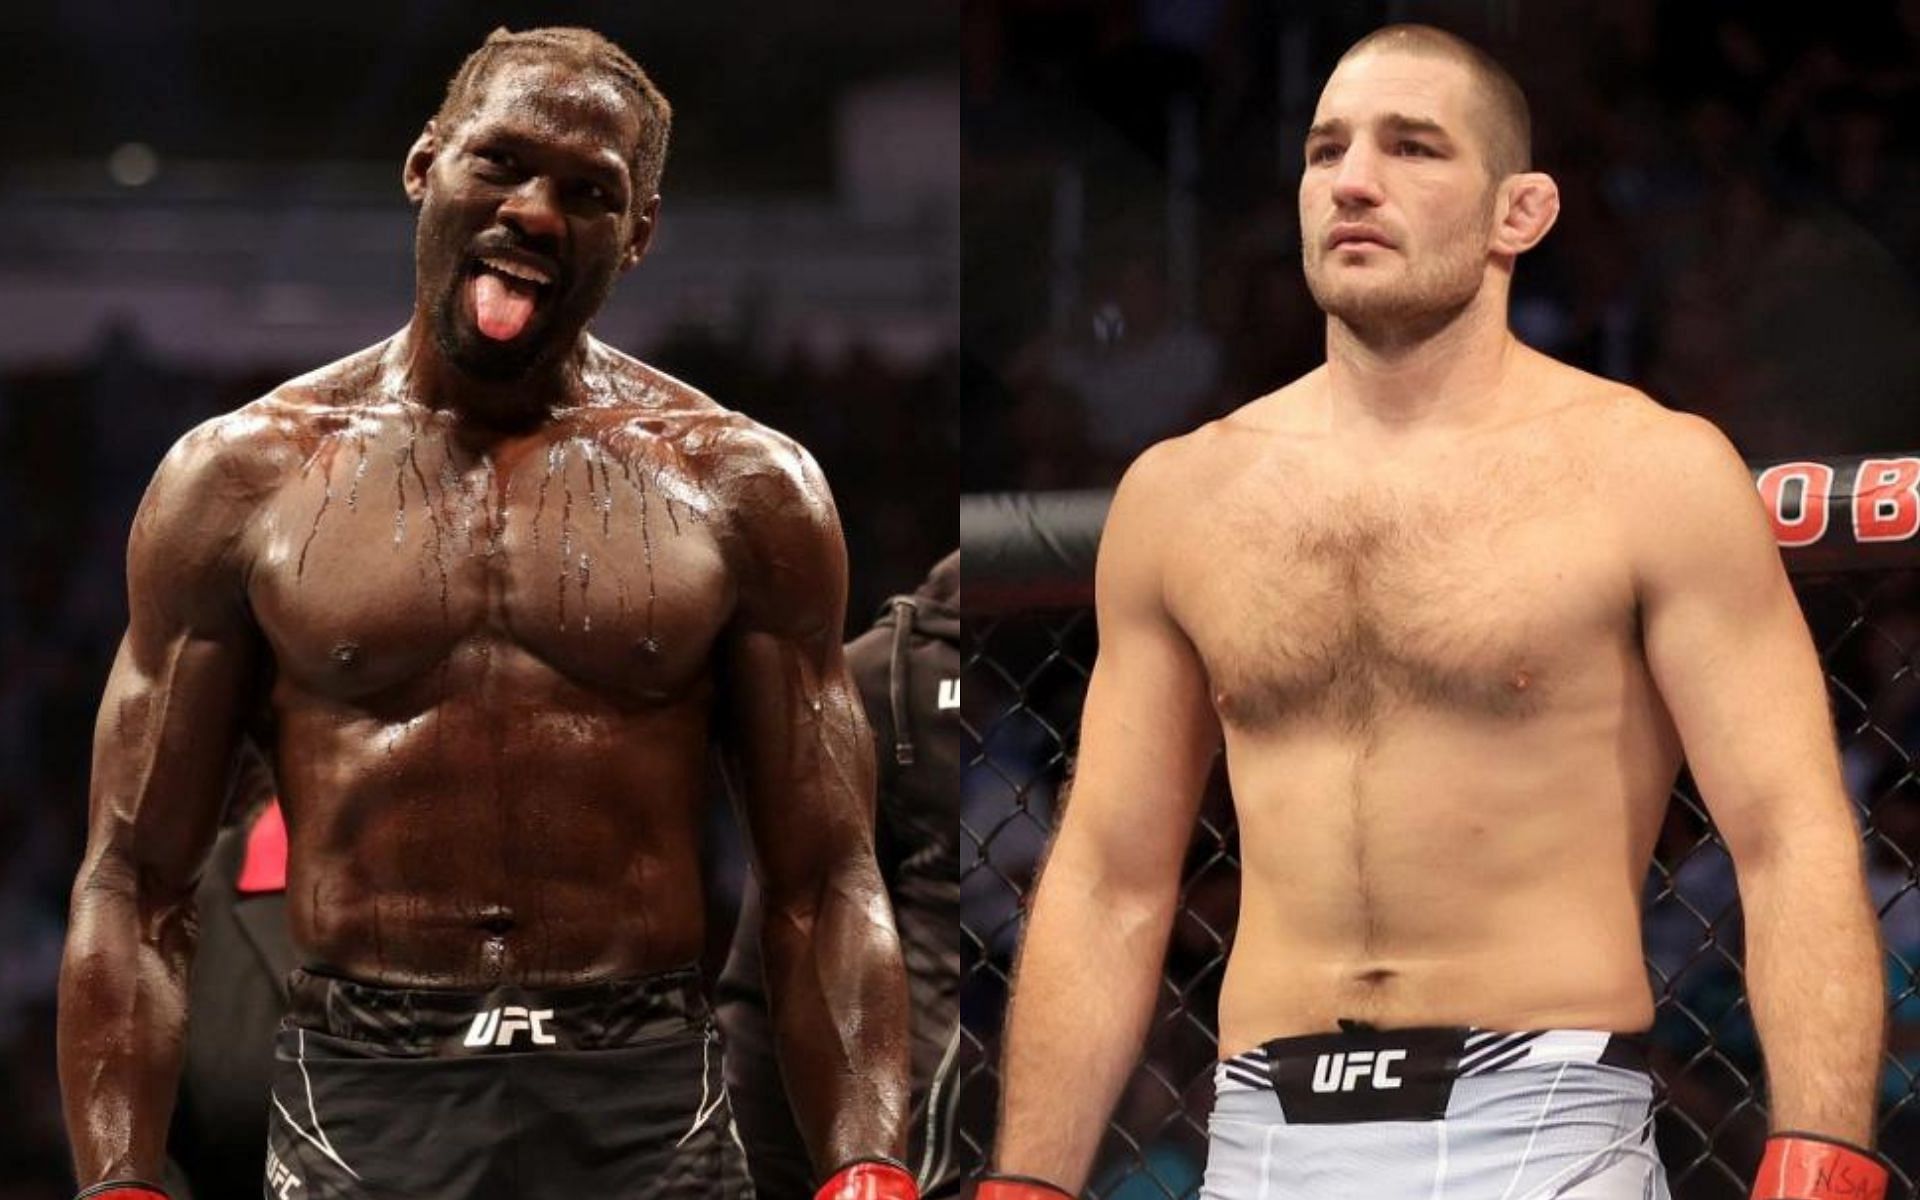 Jared Cannonier (left) and Sean Strickland (right) [Photo credit: @ufc and @mmahjunkie on Instagram]